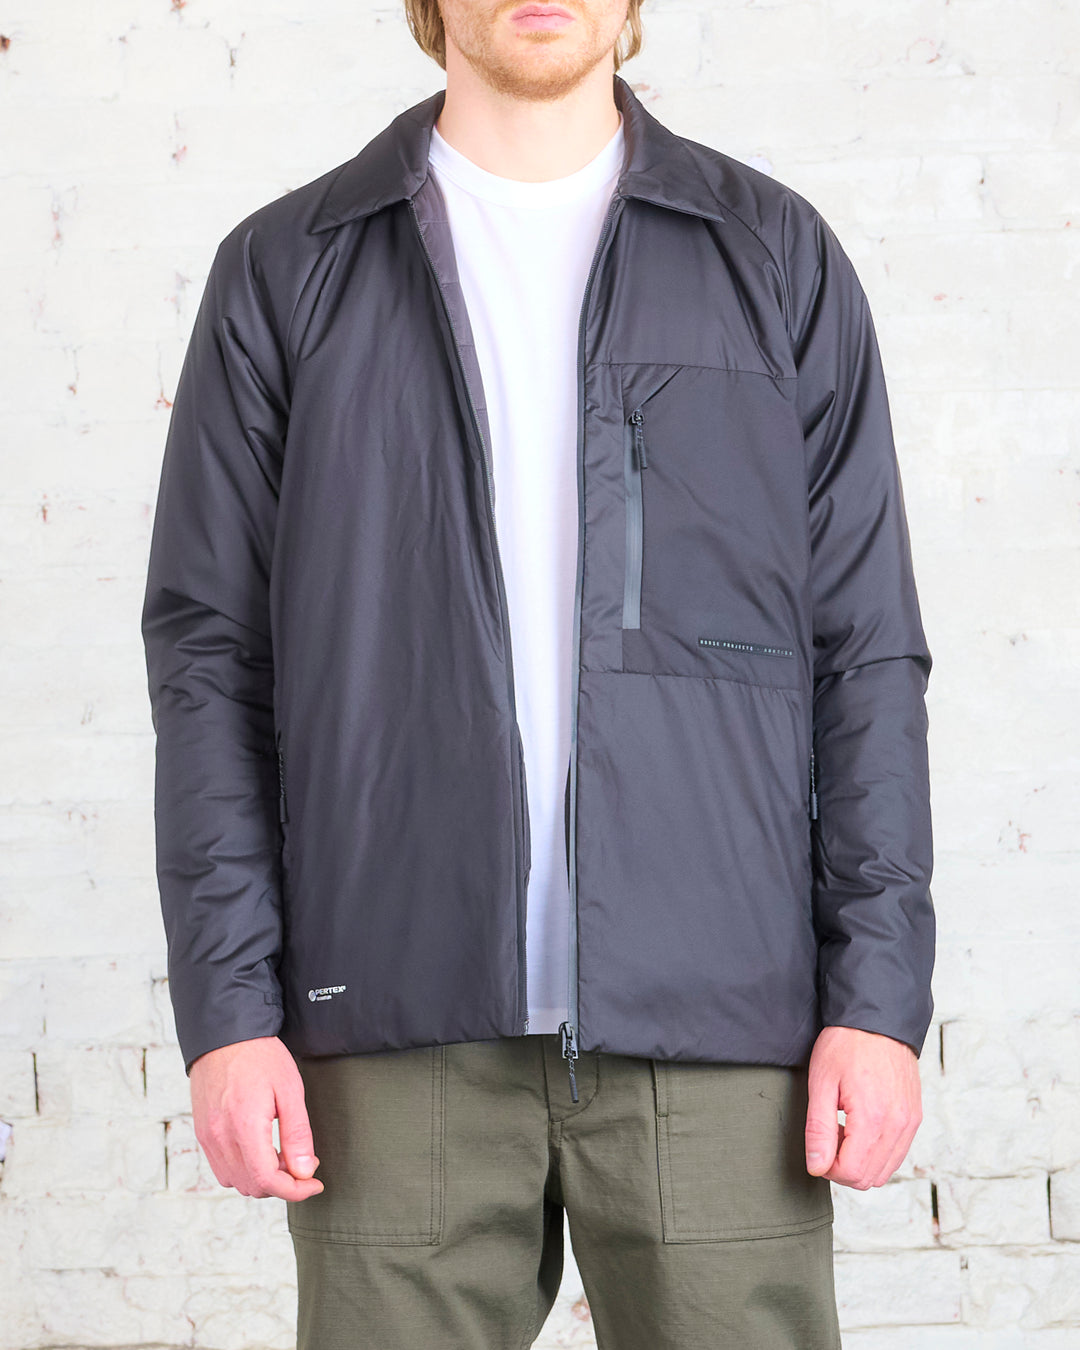 Norse Projects ARKTISK – LESS 17